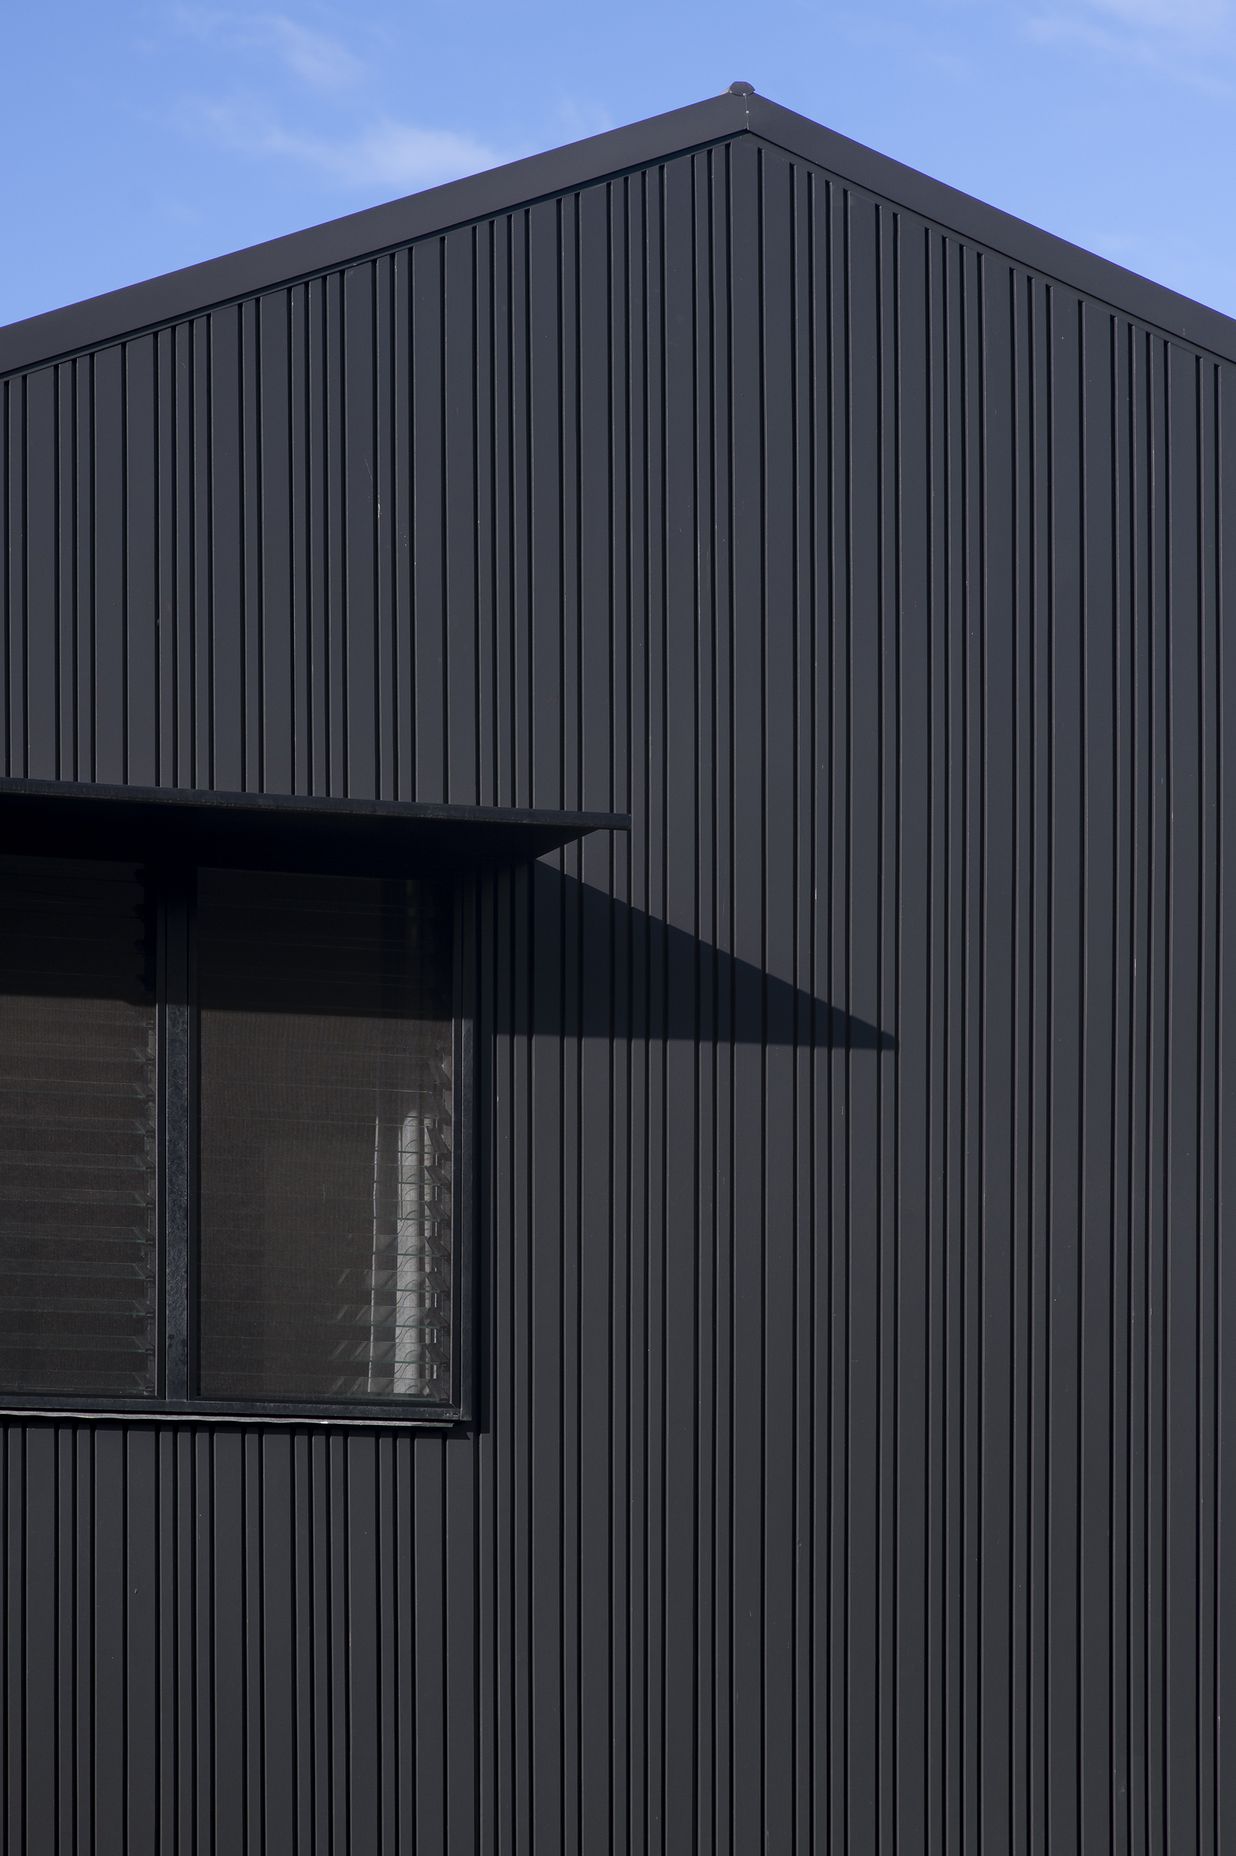 Photography: Alanna Jayne McTiernan | Timber battens create a play of light and shadow on the facade